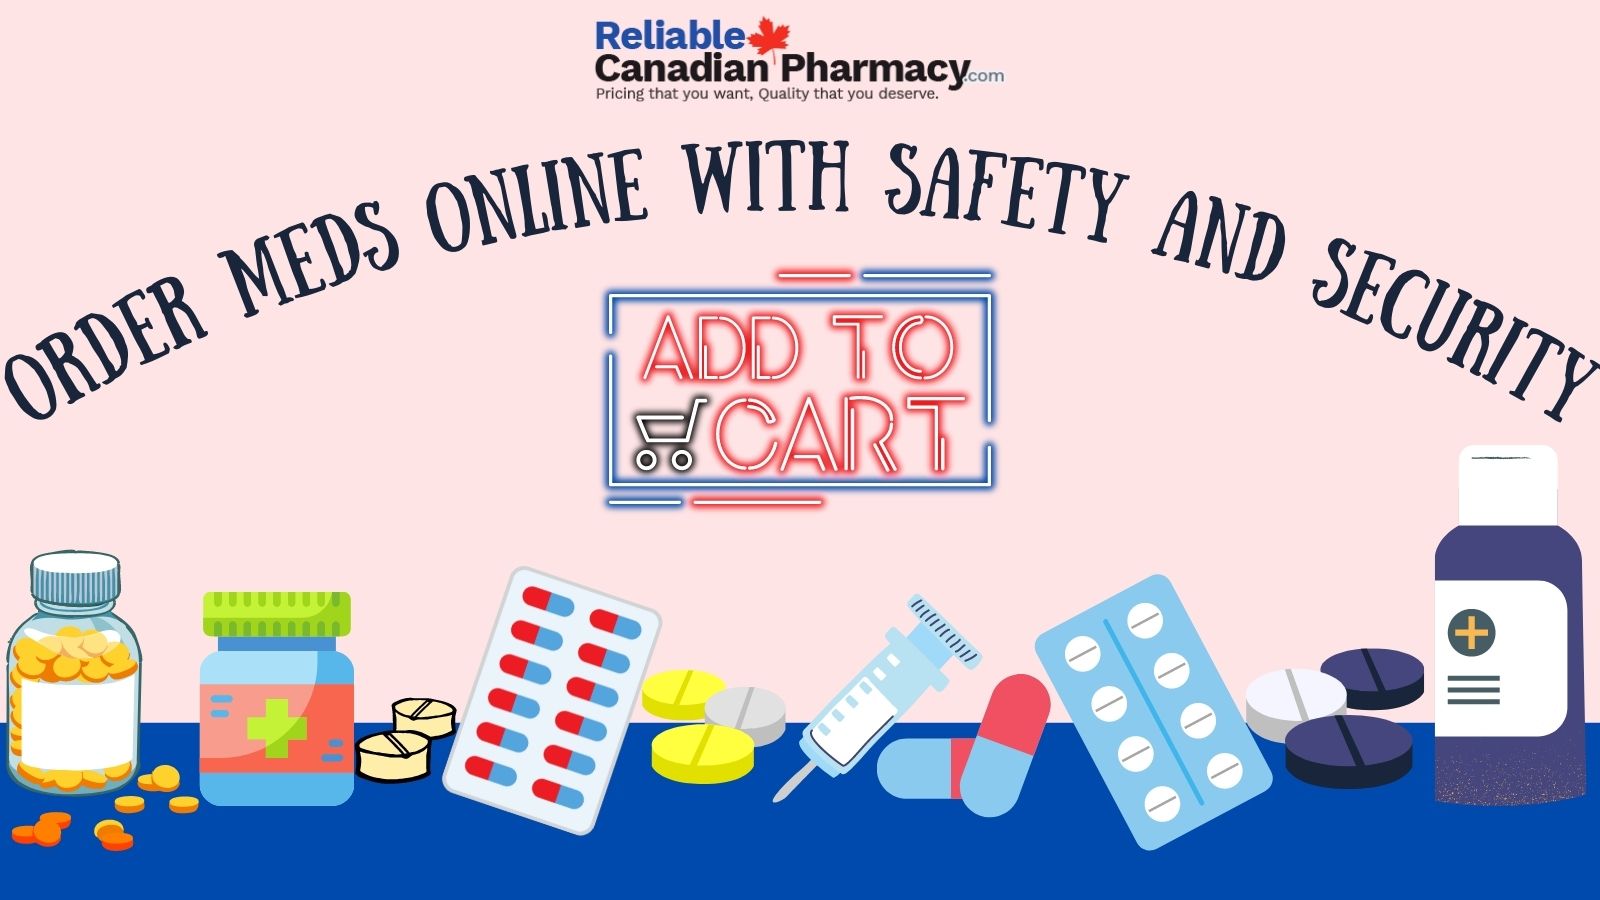 Lots of medications and a sign of add to cart